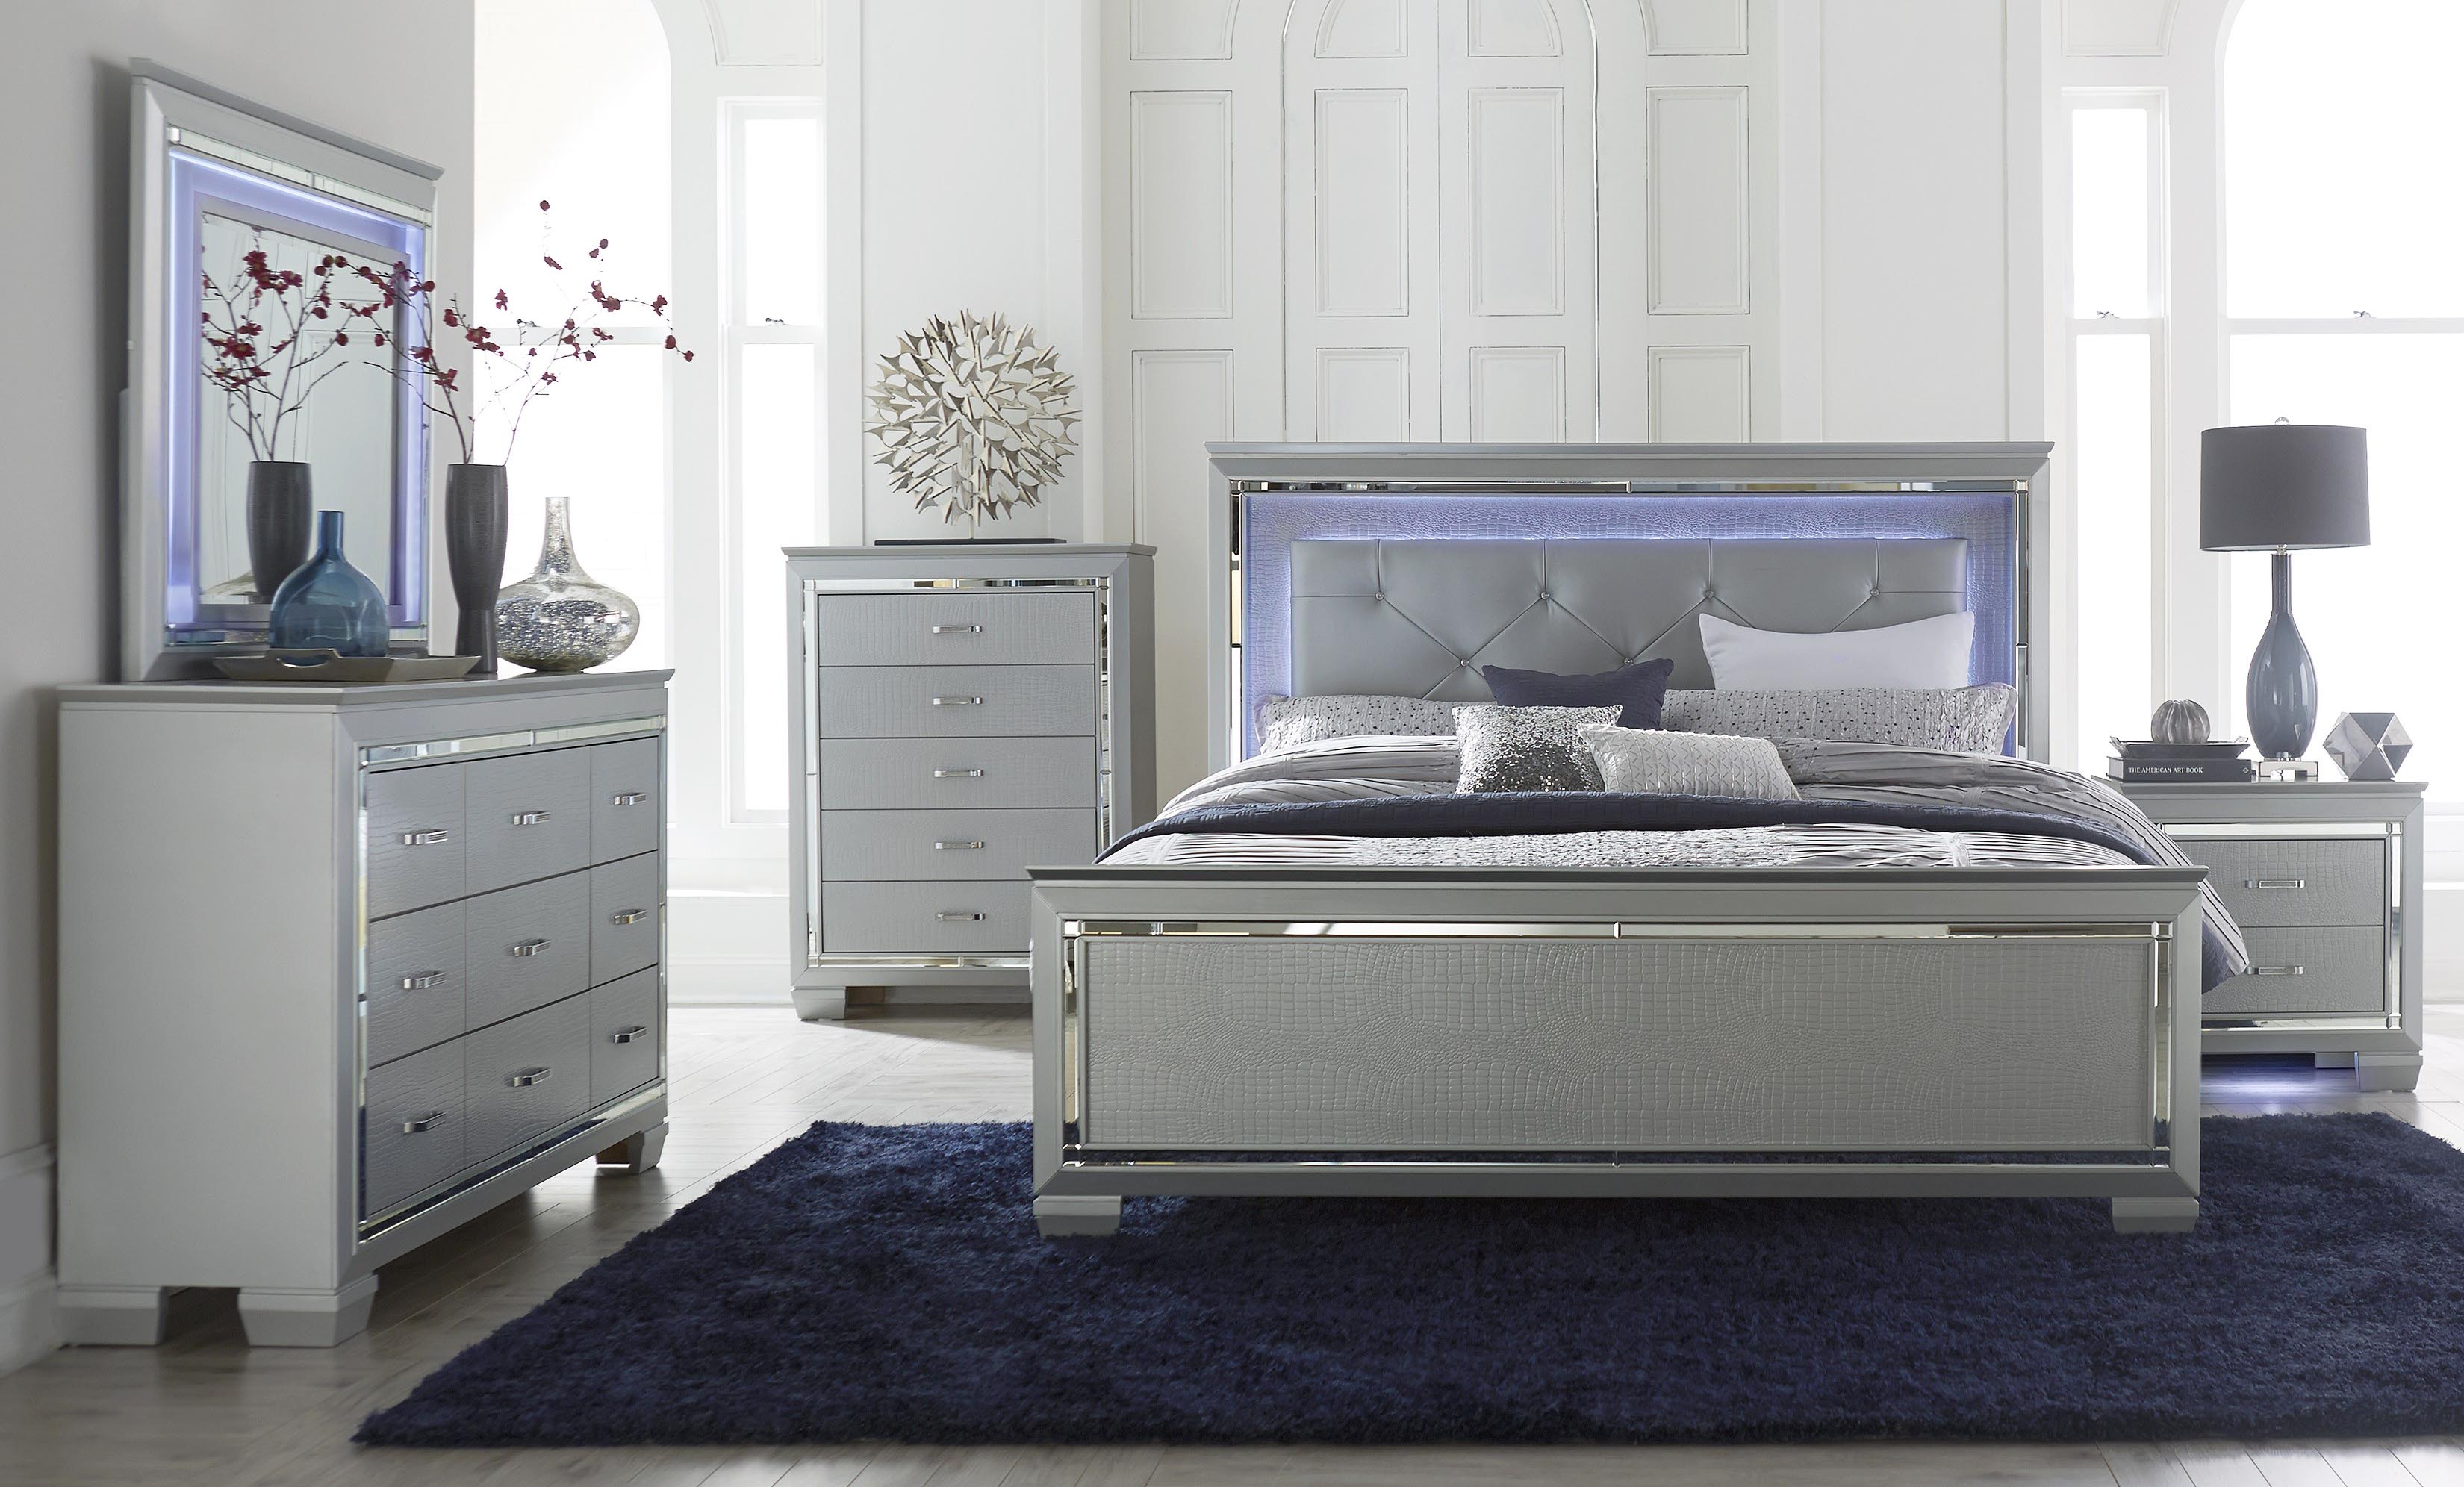 Grey Bedroom Furniture to Fit Your Personality